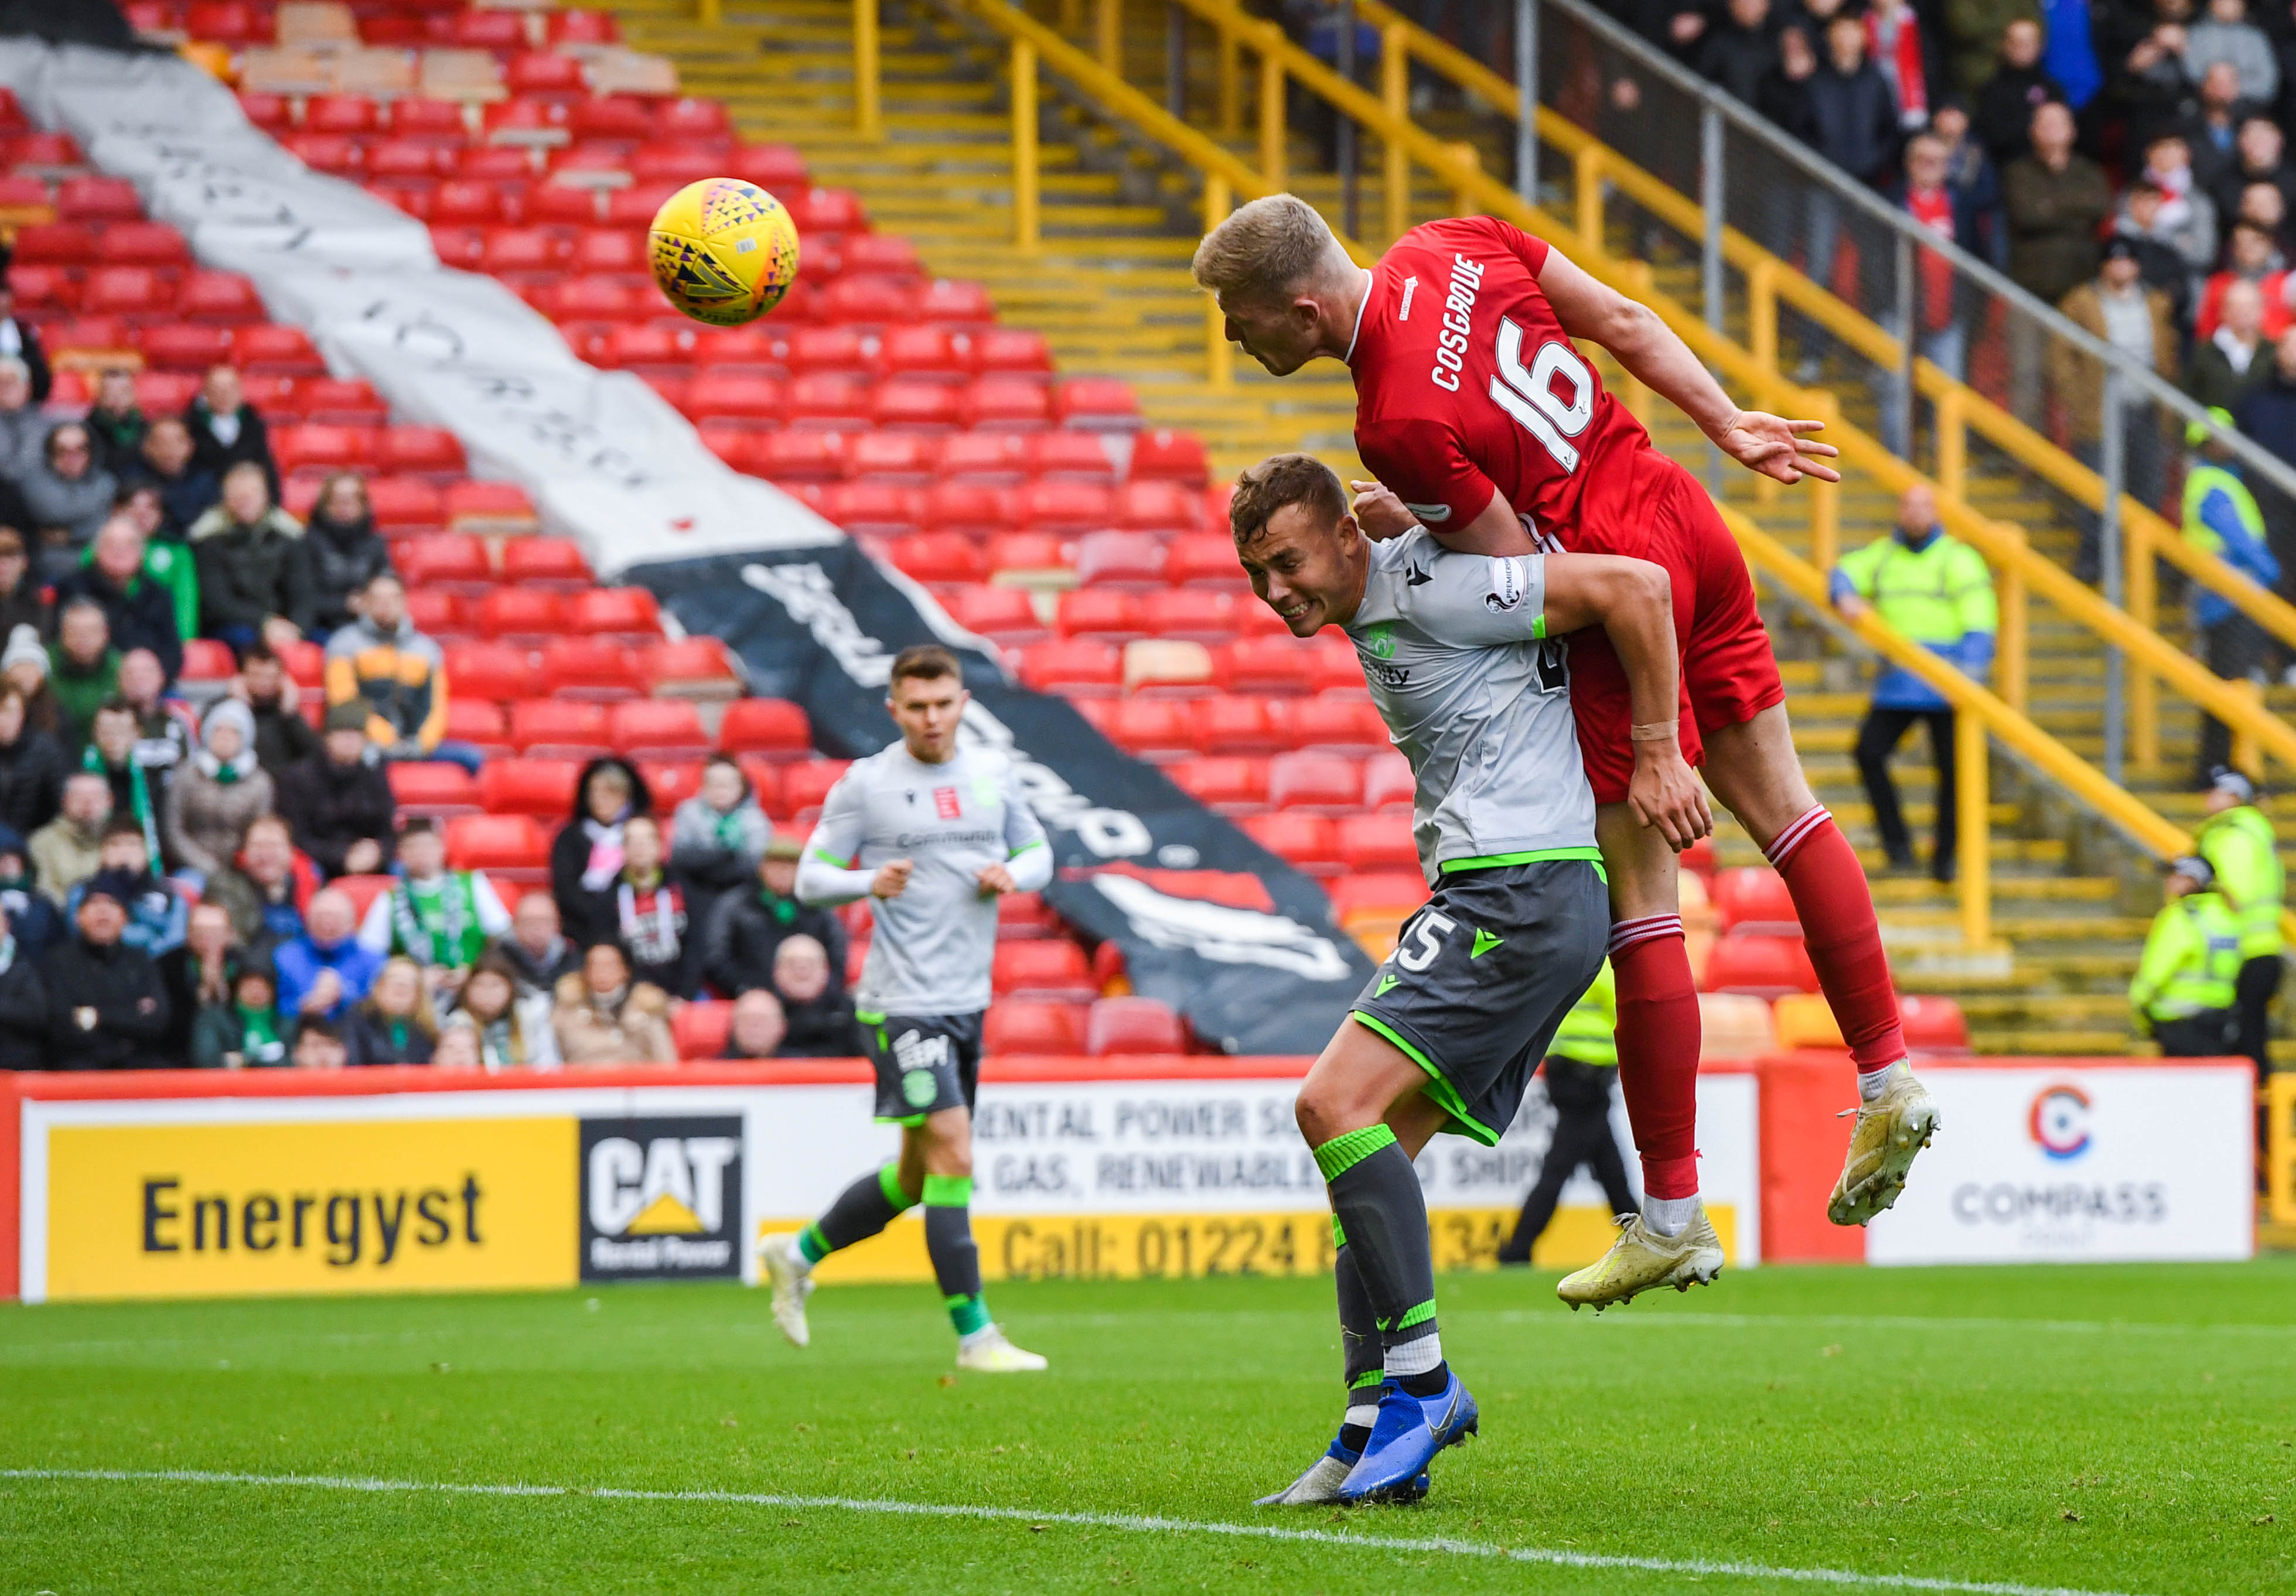 Aberdeen's Sam Cosgrove scores a header to make it 1-1 during the Ladbrokes Premiership match between Aberdeen and Hibernian at Pittodrie.